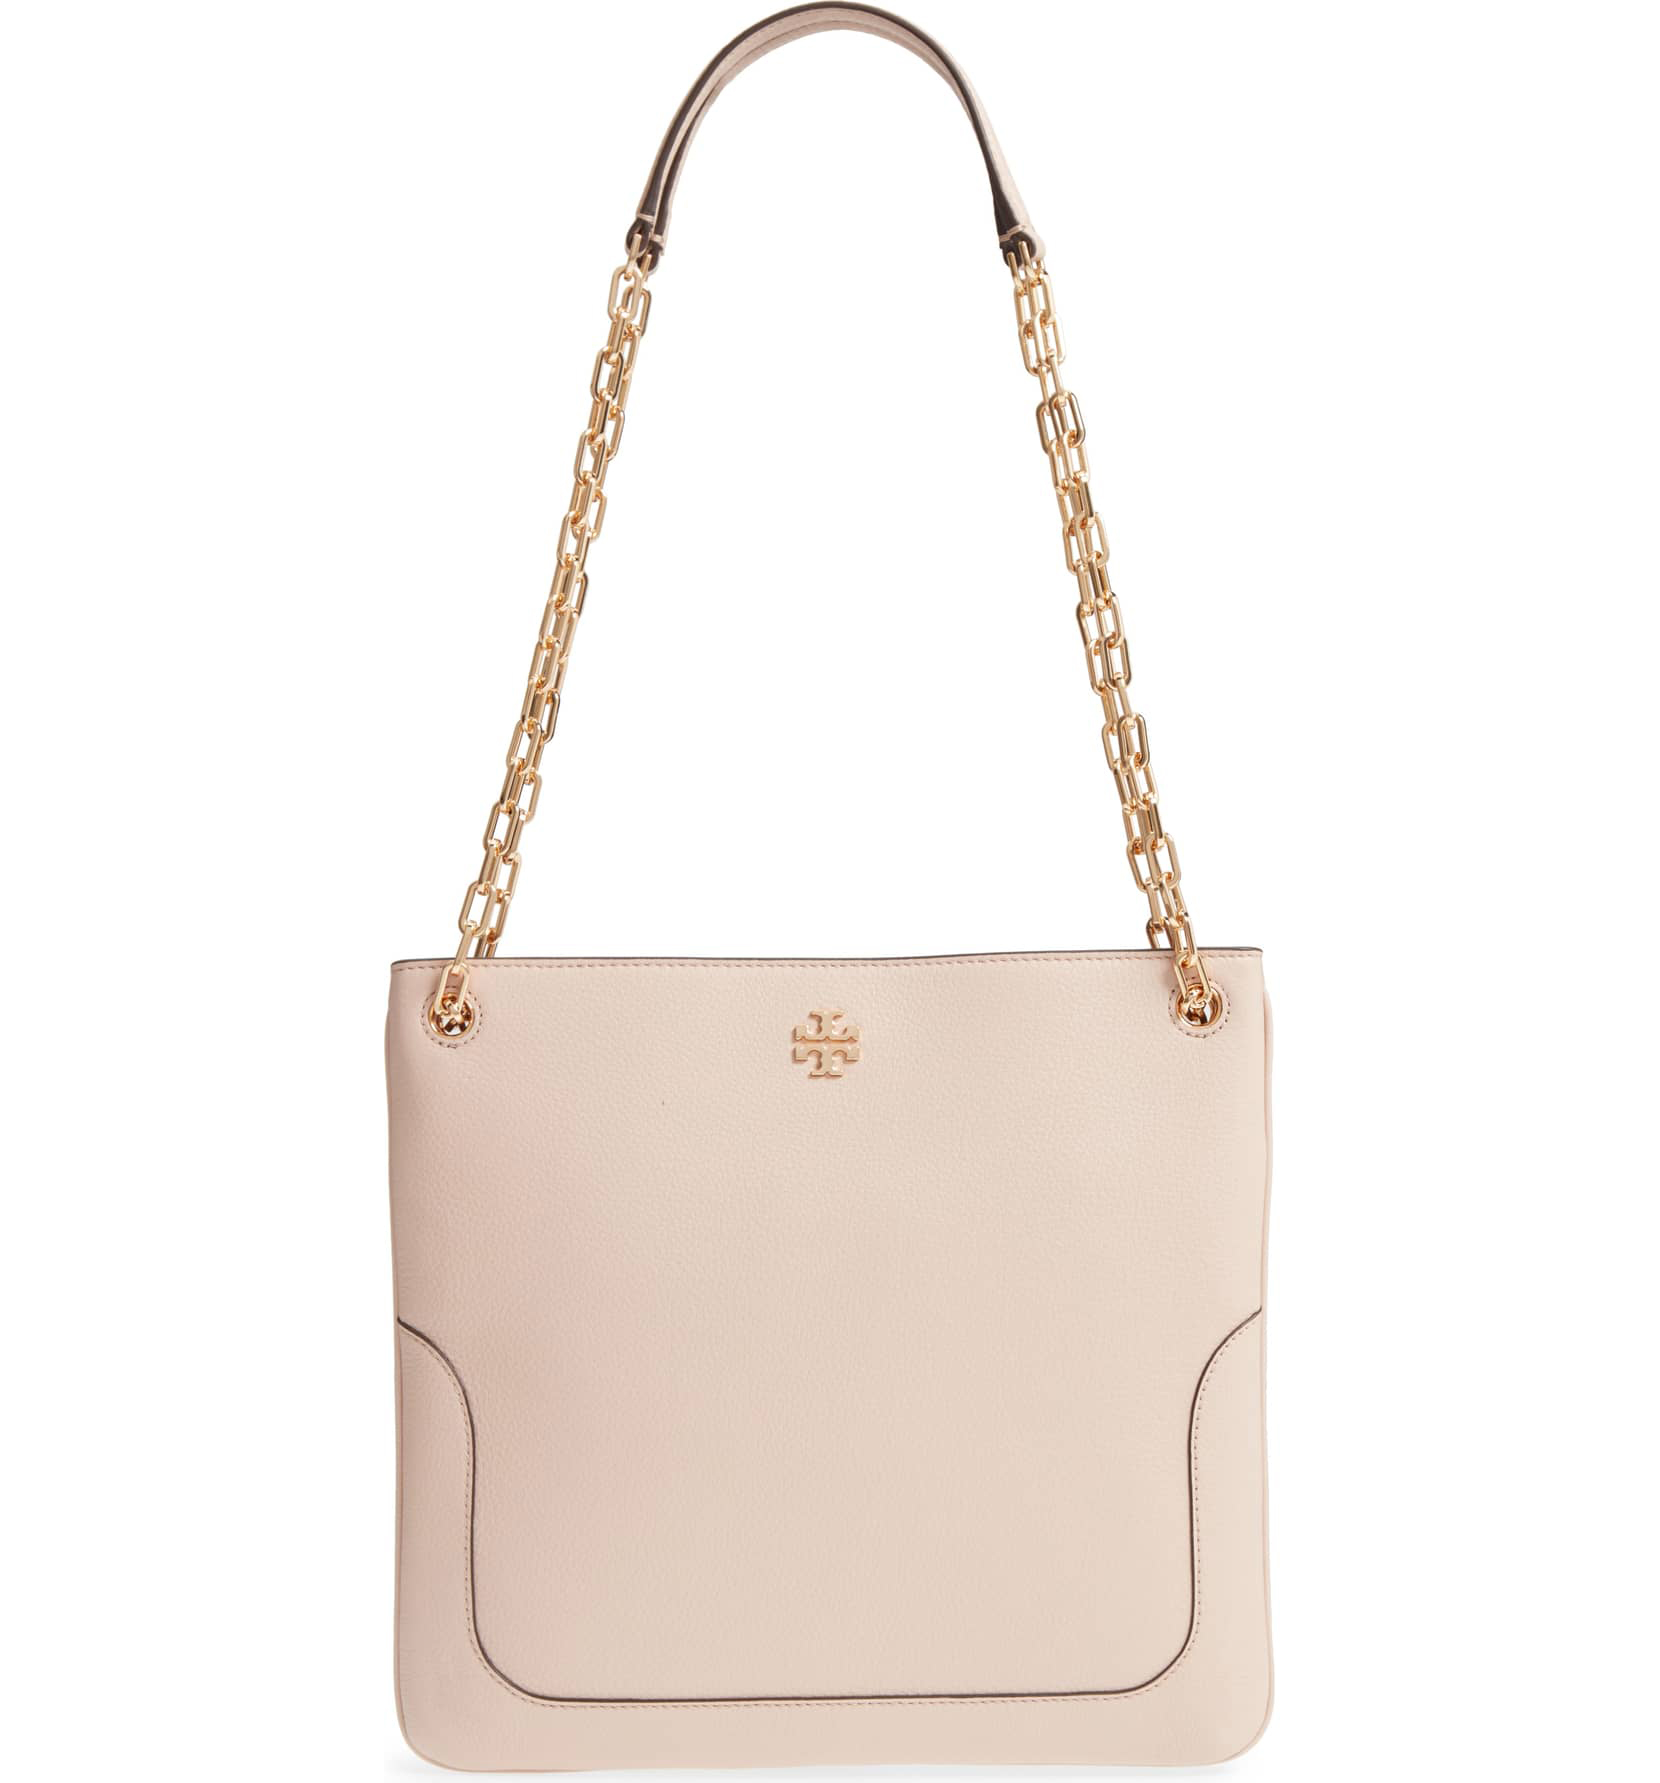 These 5 Must-Have Tory Burch Bags Are on Sale at Nordstrom!